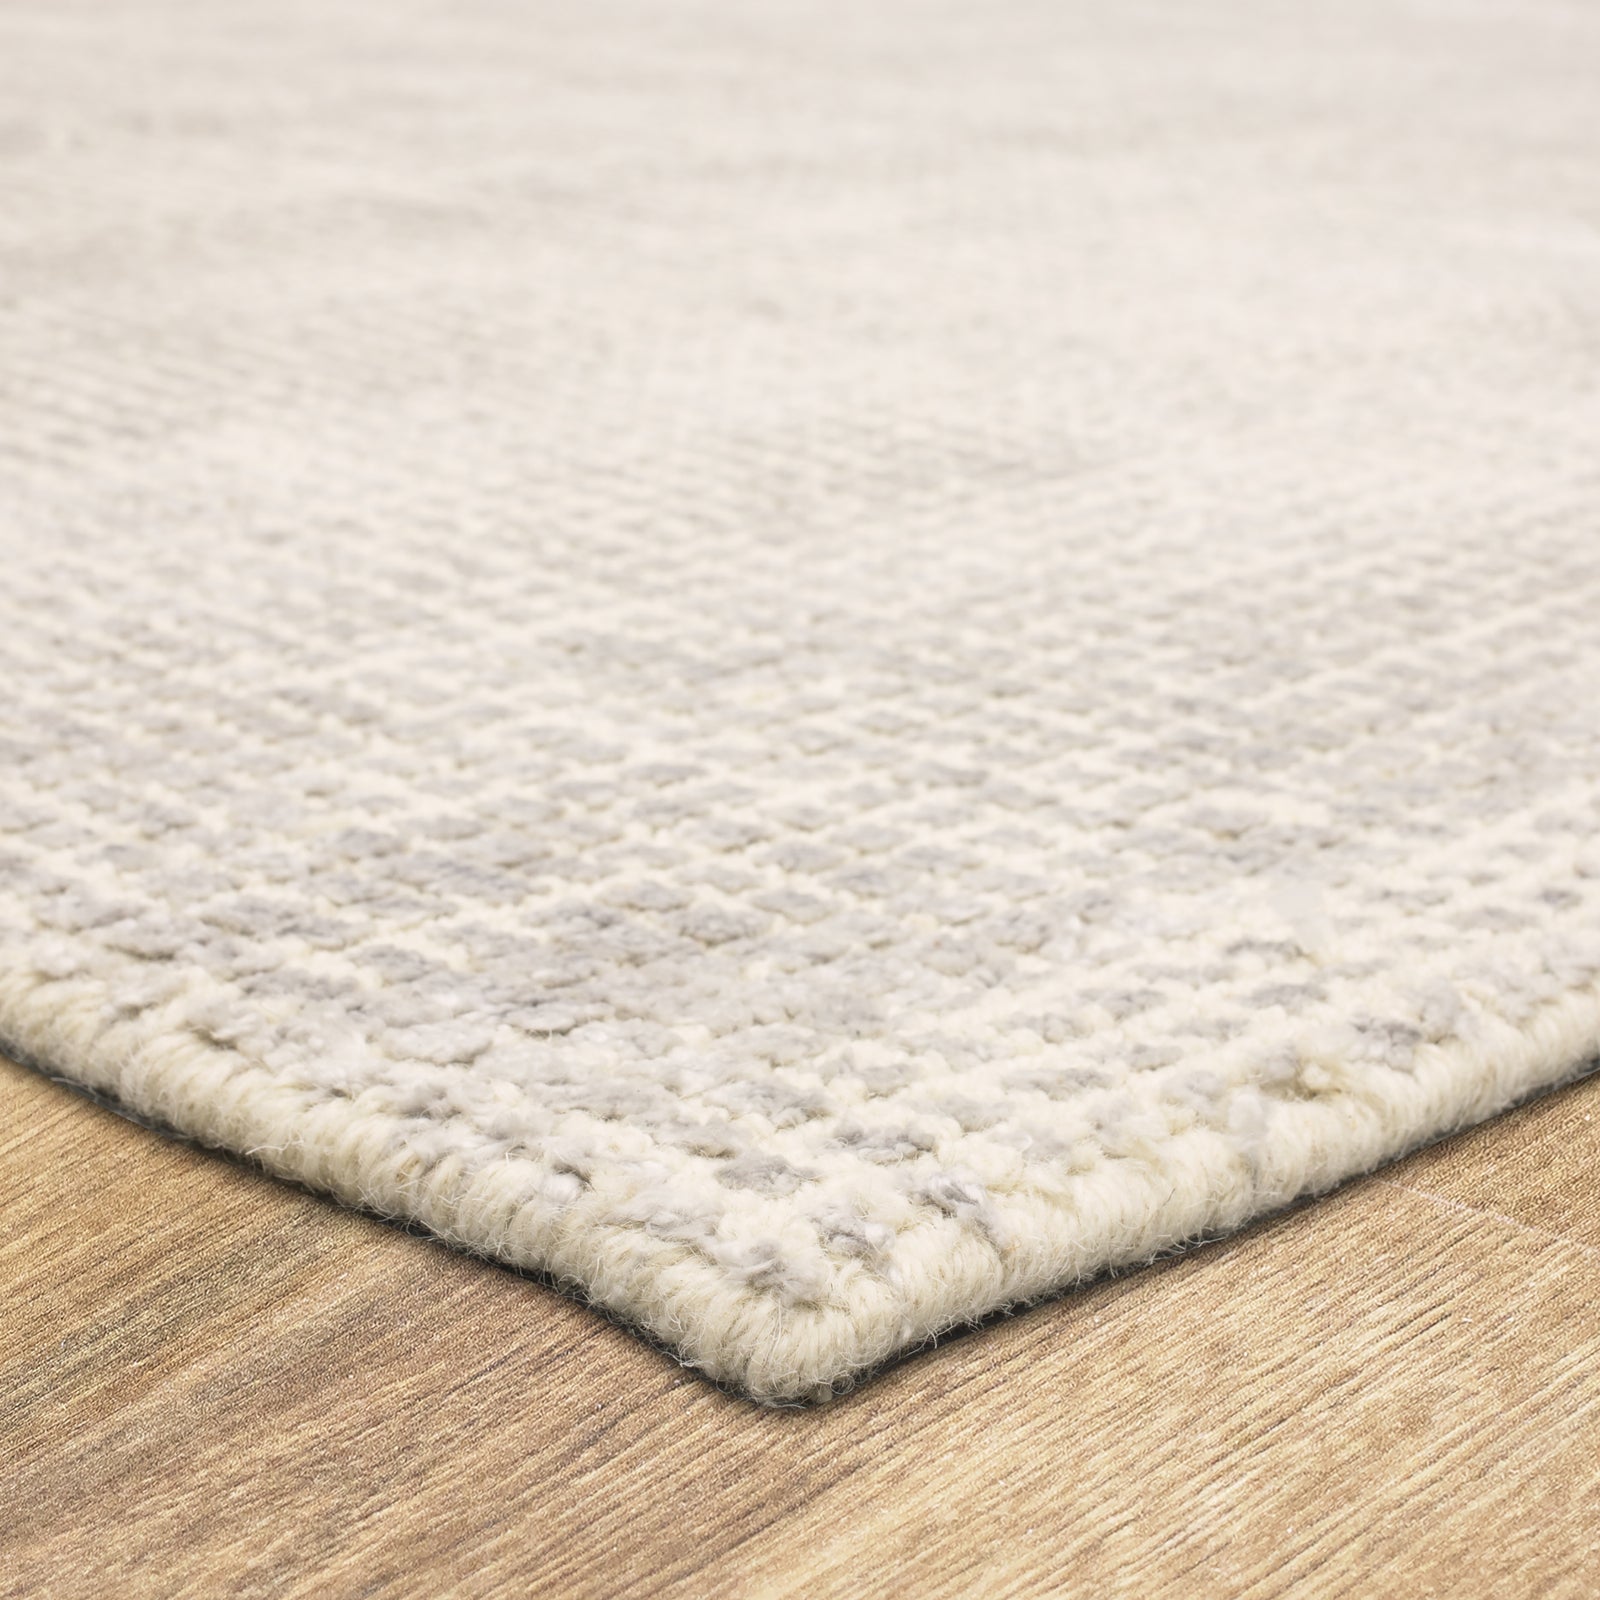 Karastan Labyrinth Meander Silver Birch Area Rug – Incredible Rugs and ...